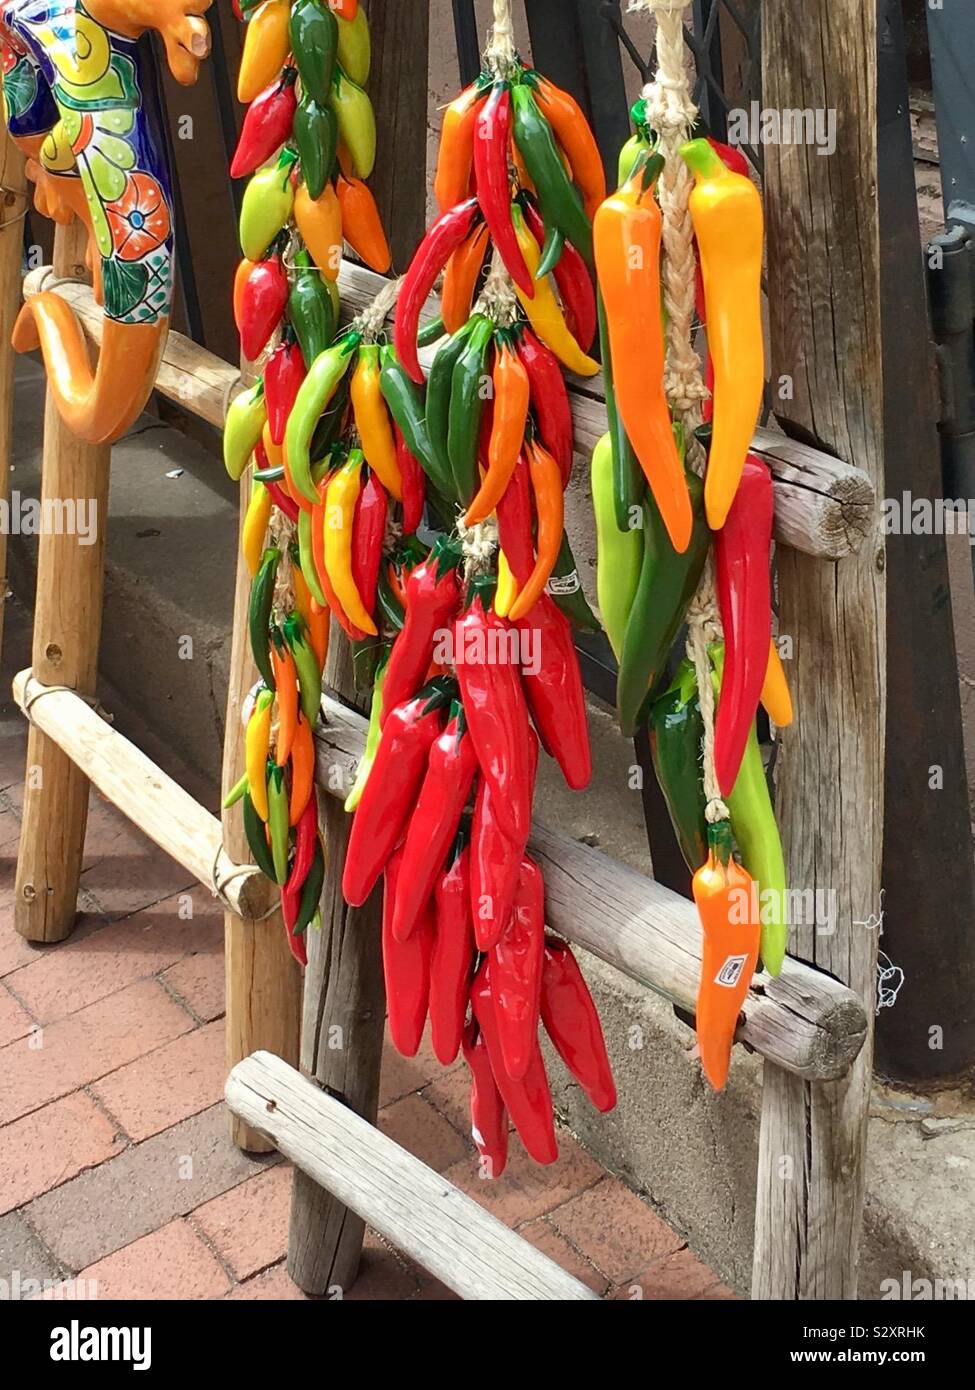 Brightly colored plastic peppers hanging on a ladder Stock Photo